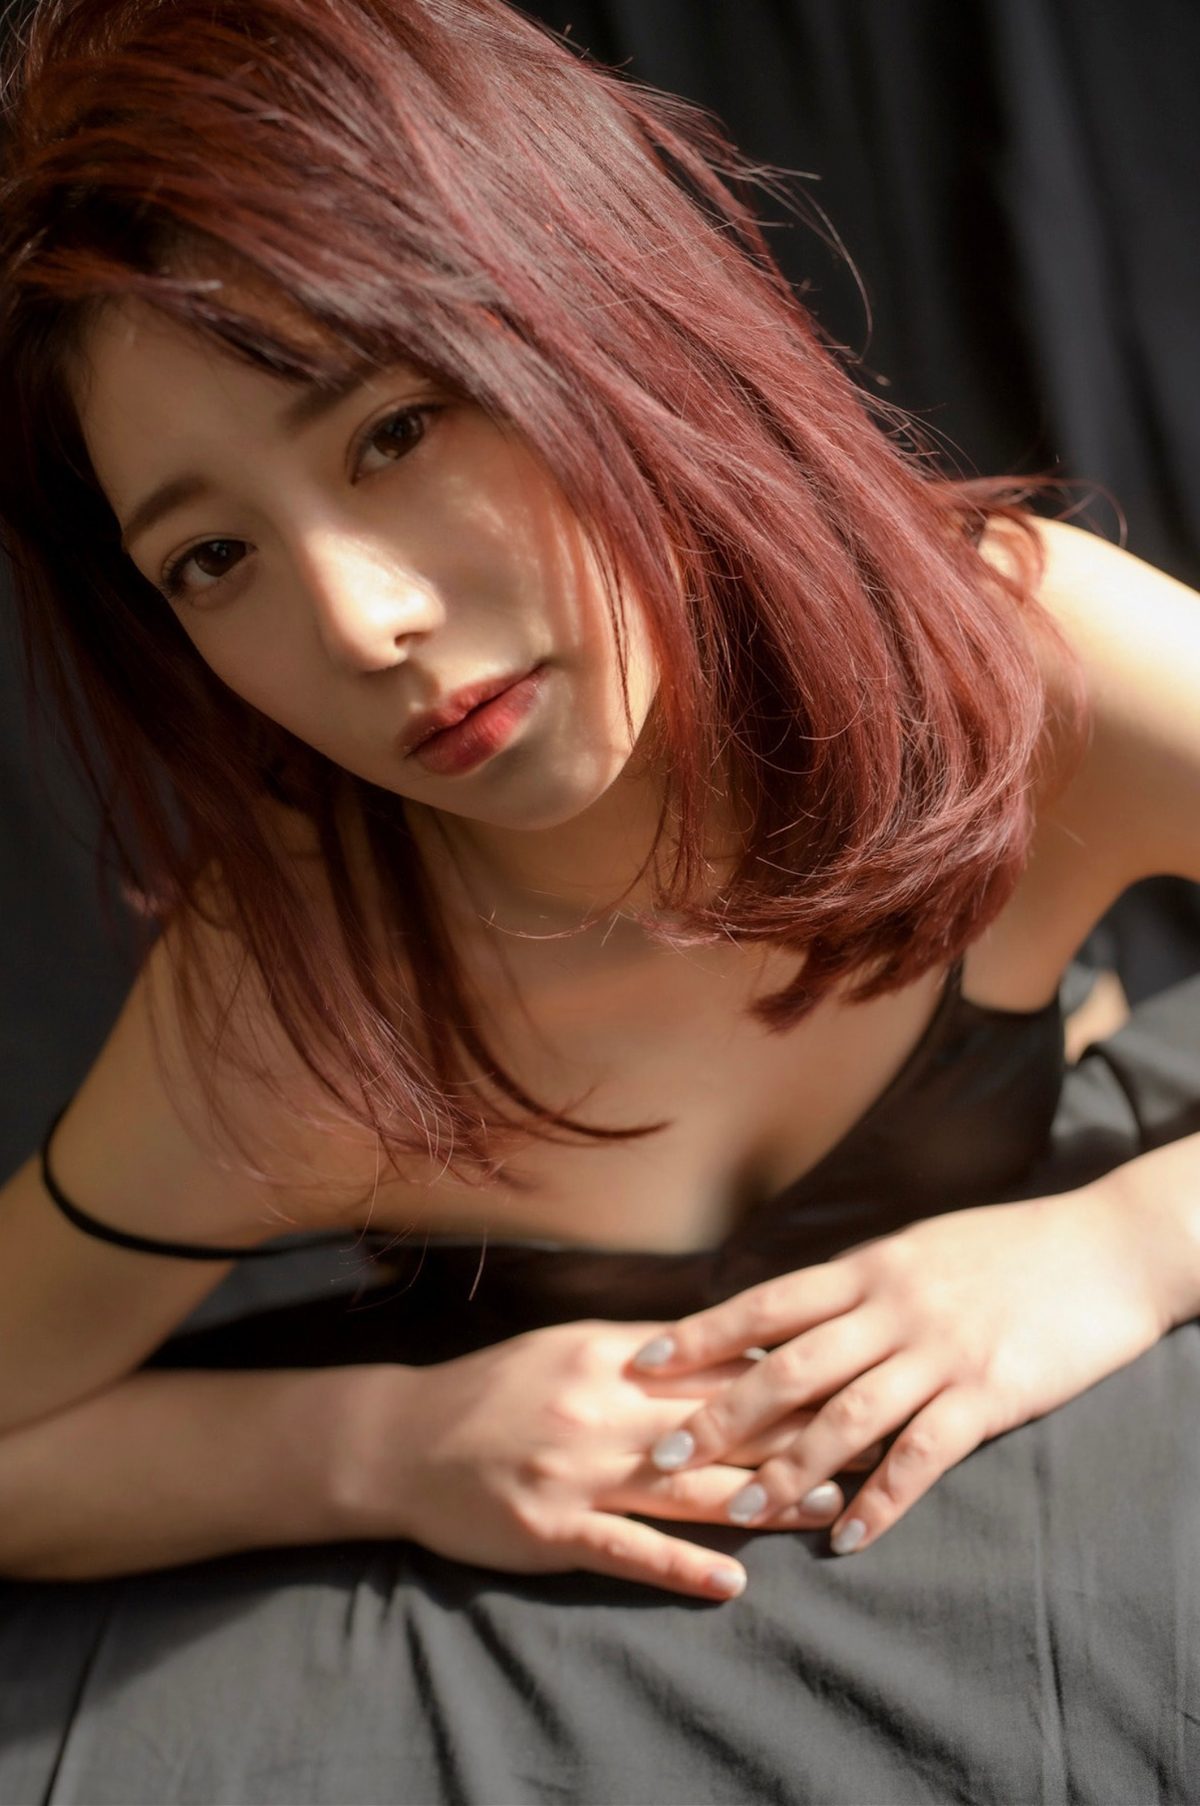 Nozomi Arimura 有村のぞみ Hair Nude Photo Collection As It Is 0035 8411622051.jpg